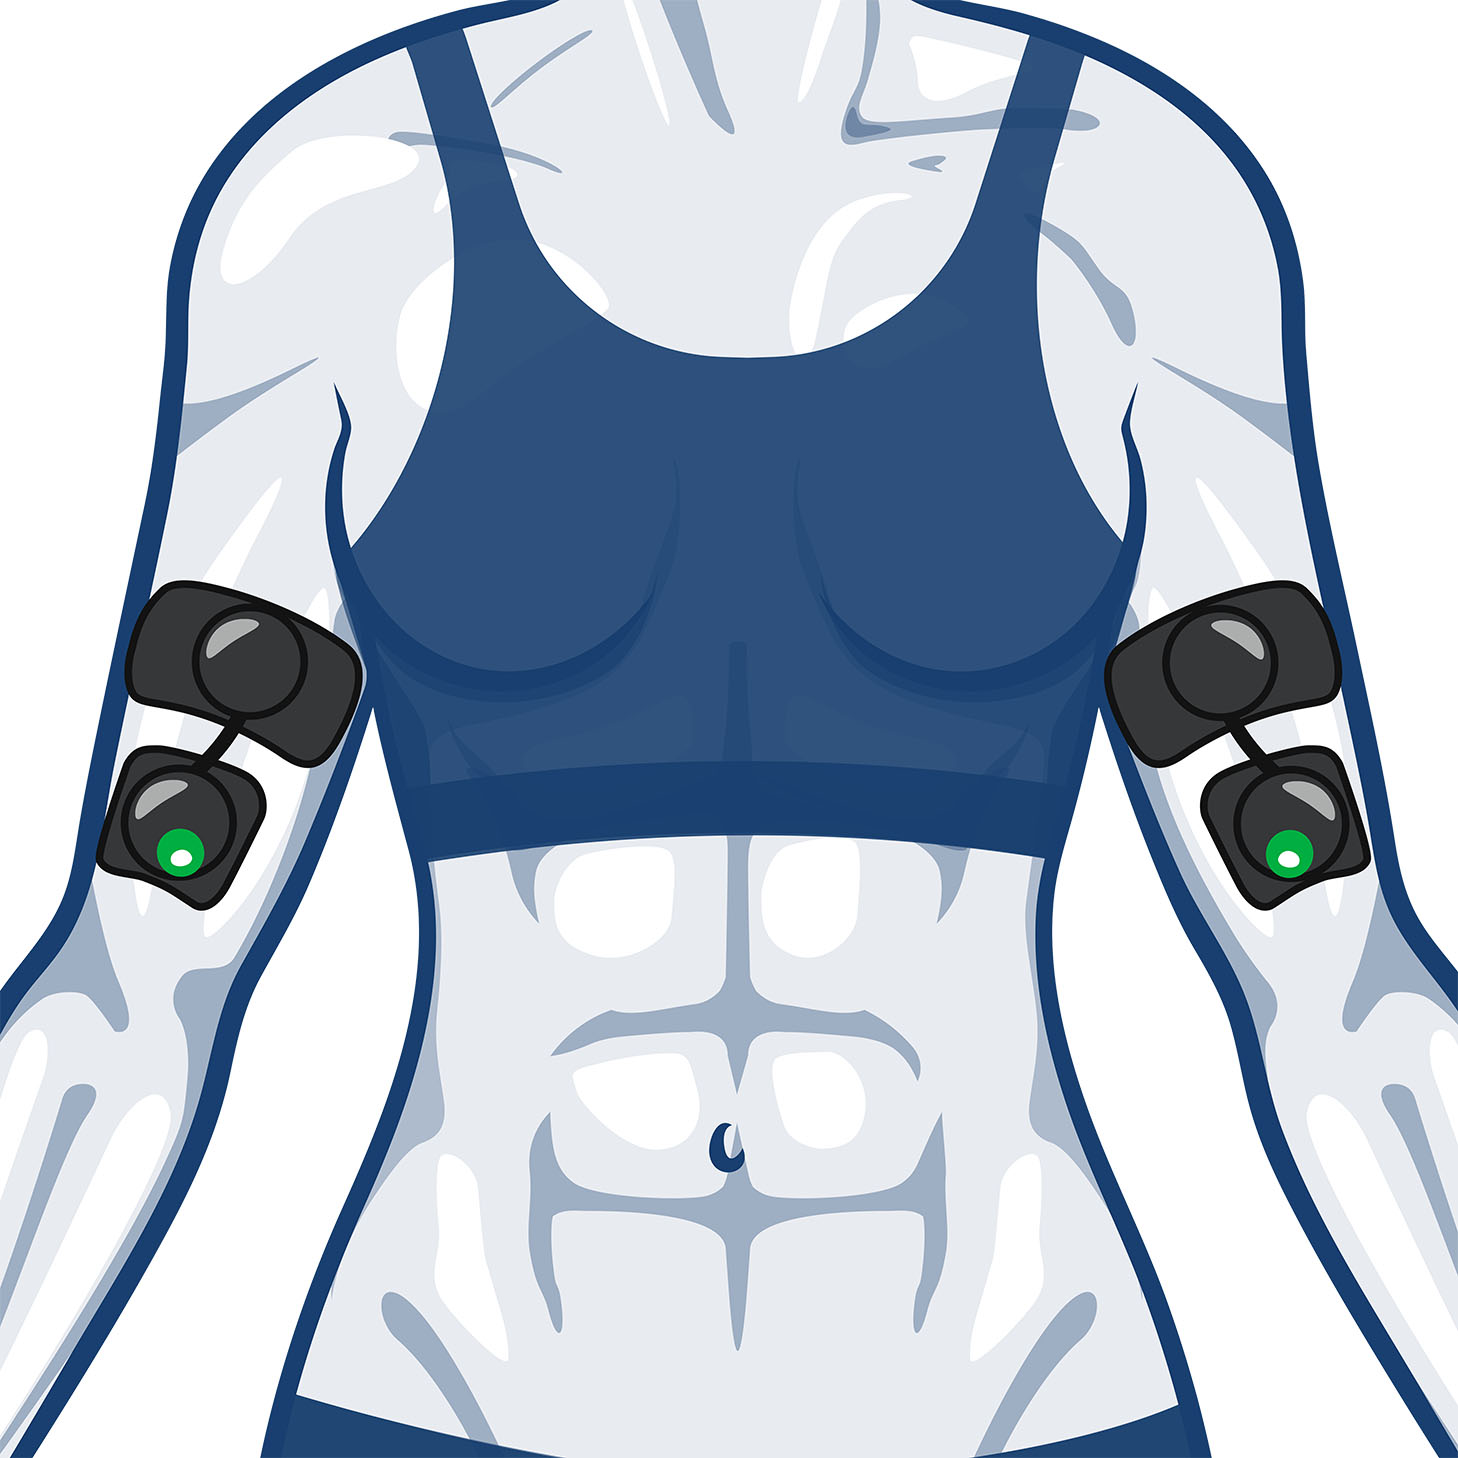 Electrode Placement for Muscle Stimulation